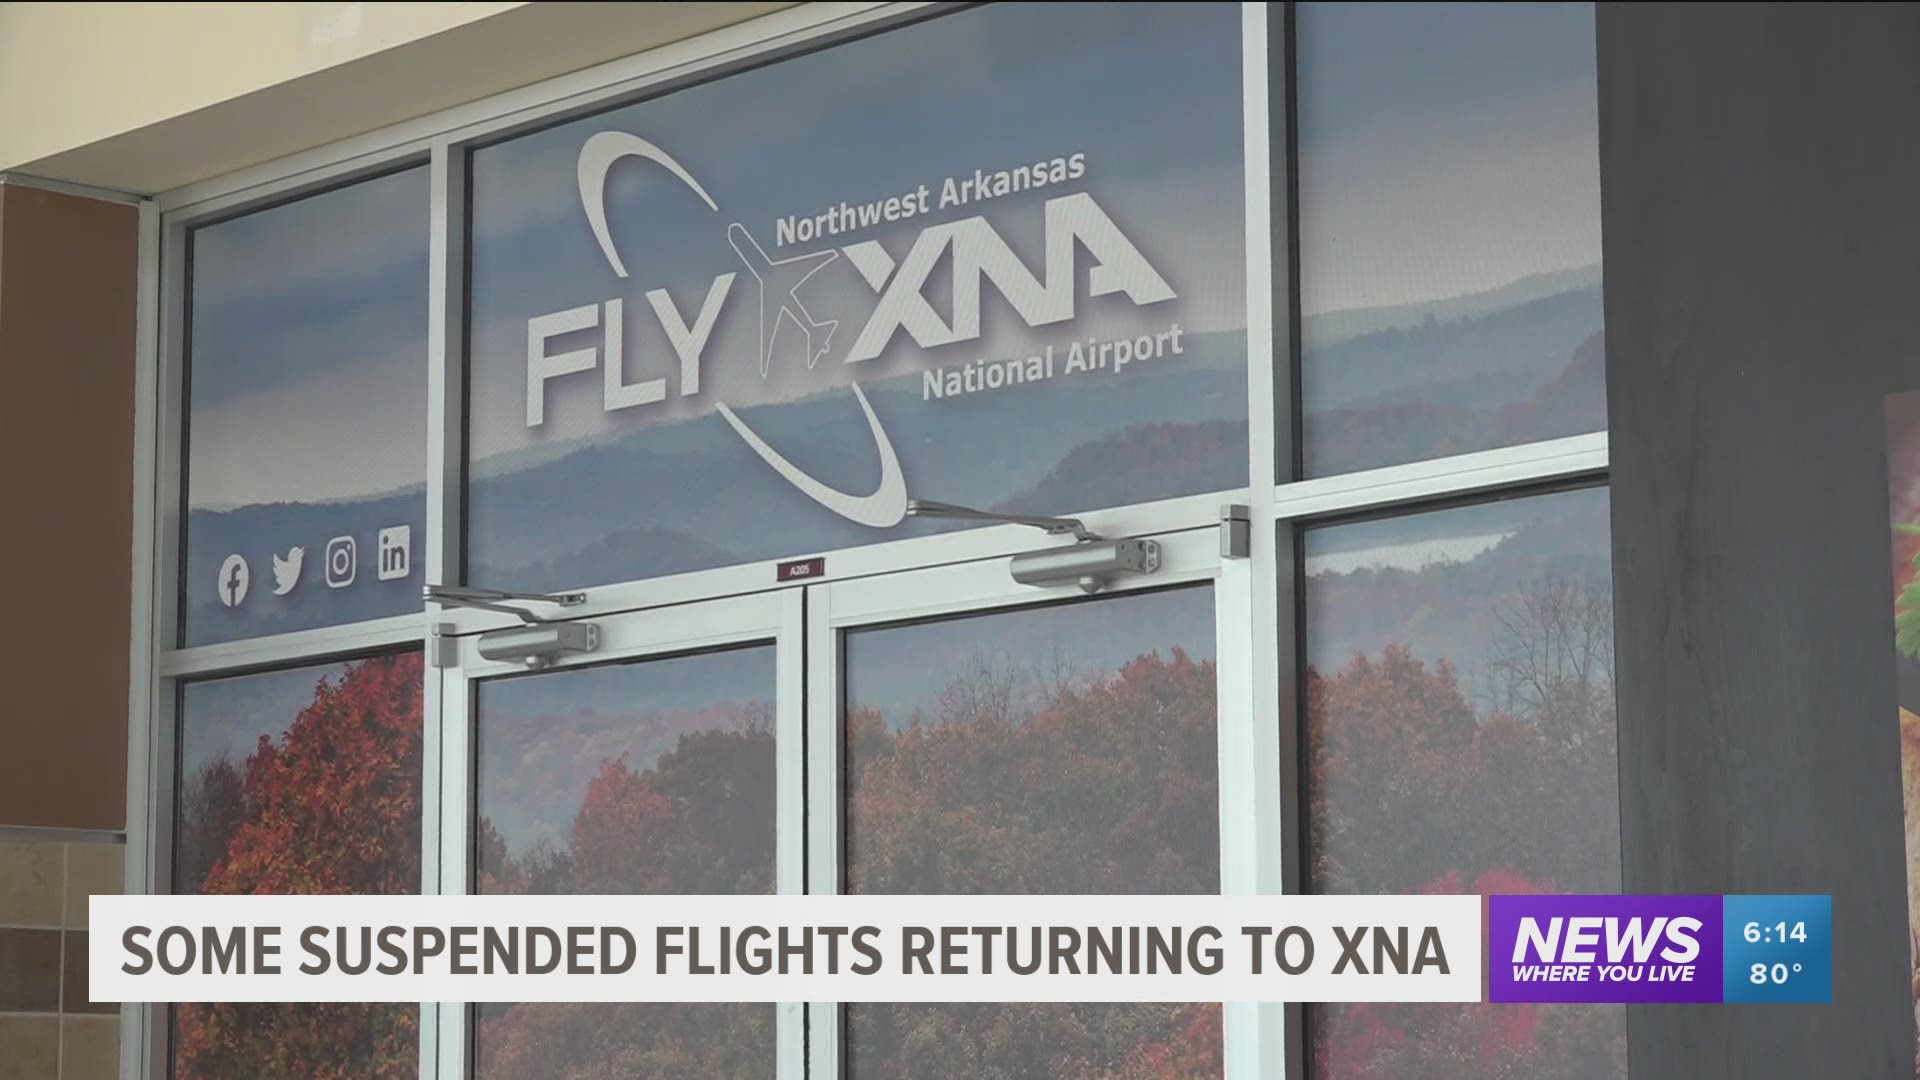 After a year of mostly empty planes and terminals, the Northwest Arkansas National Airport (XNA) announced the return of some suspended flights.